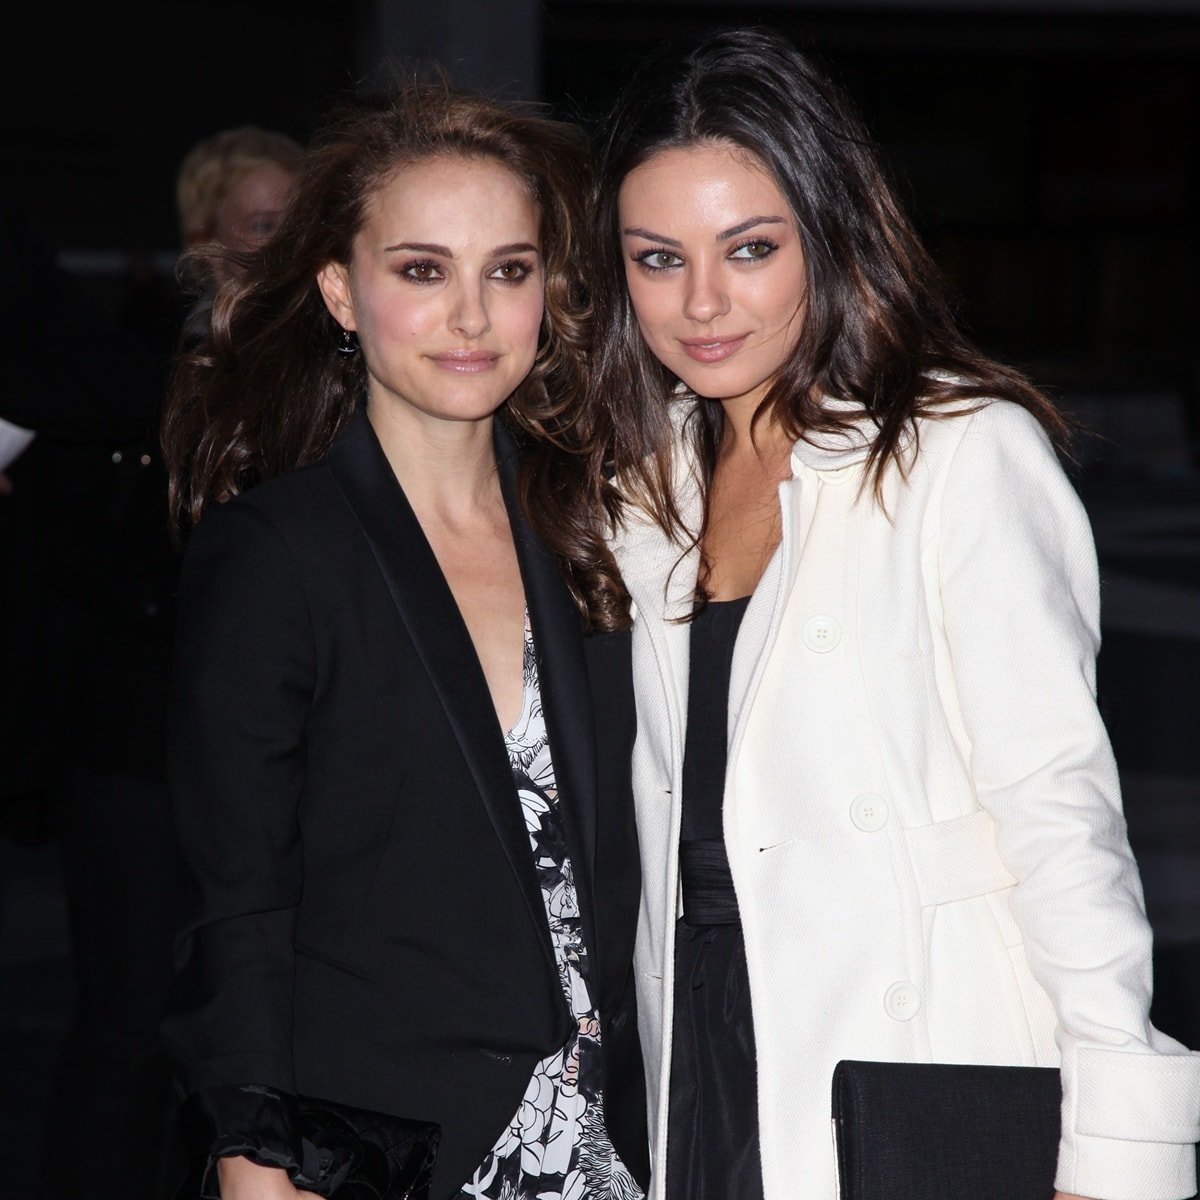 Actresses Natalie Portman and Mila Kunis attend the 2009 American Ballet Theatre Fall Gala